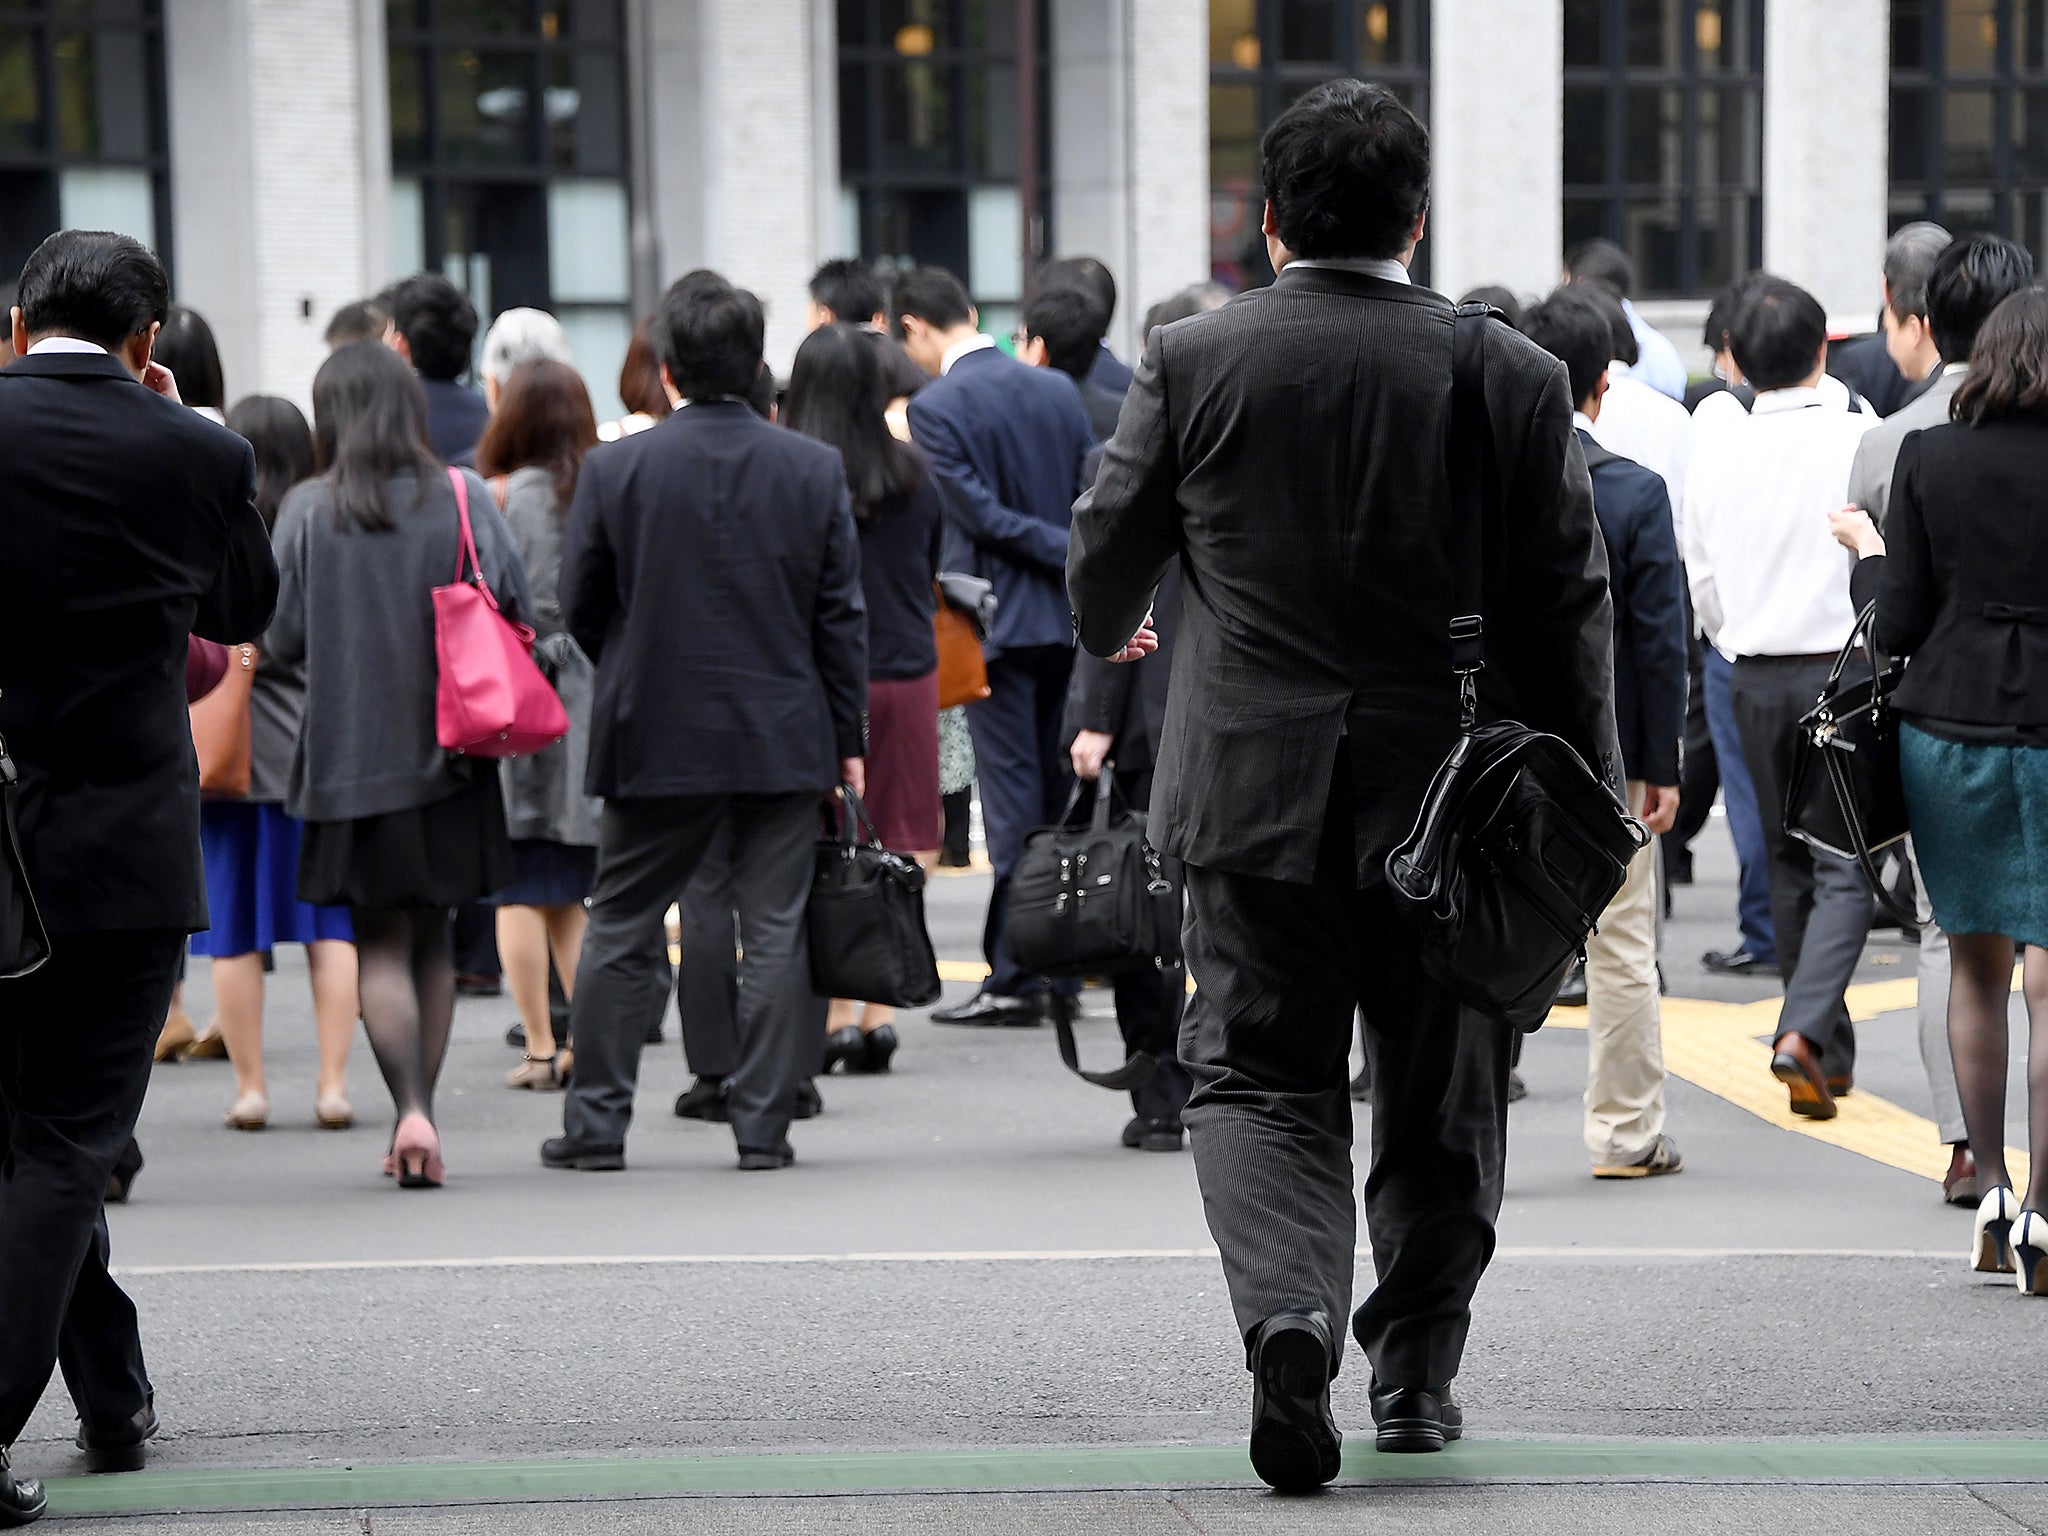 Remote working in Tokyo's public spaces is posed as a solution to reducing congestion on the roads during the 2020 Olympic Games